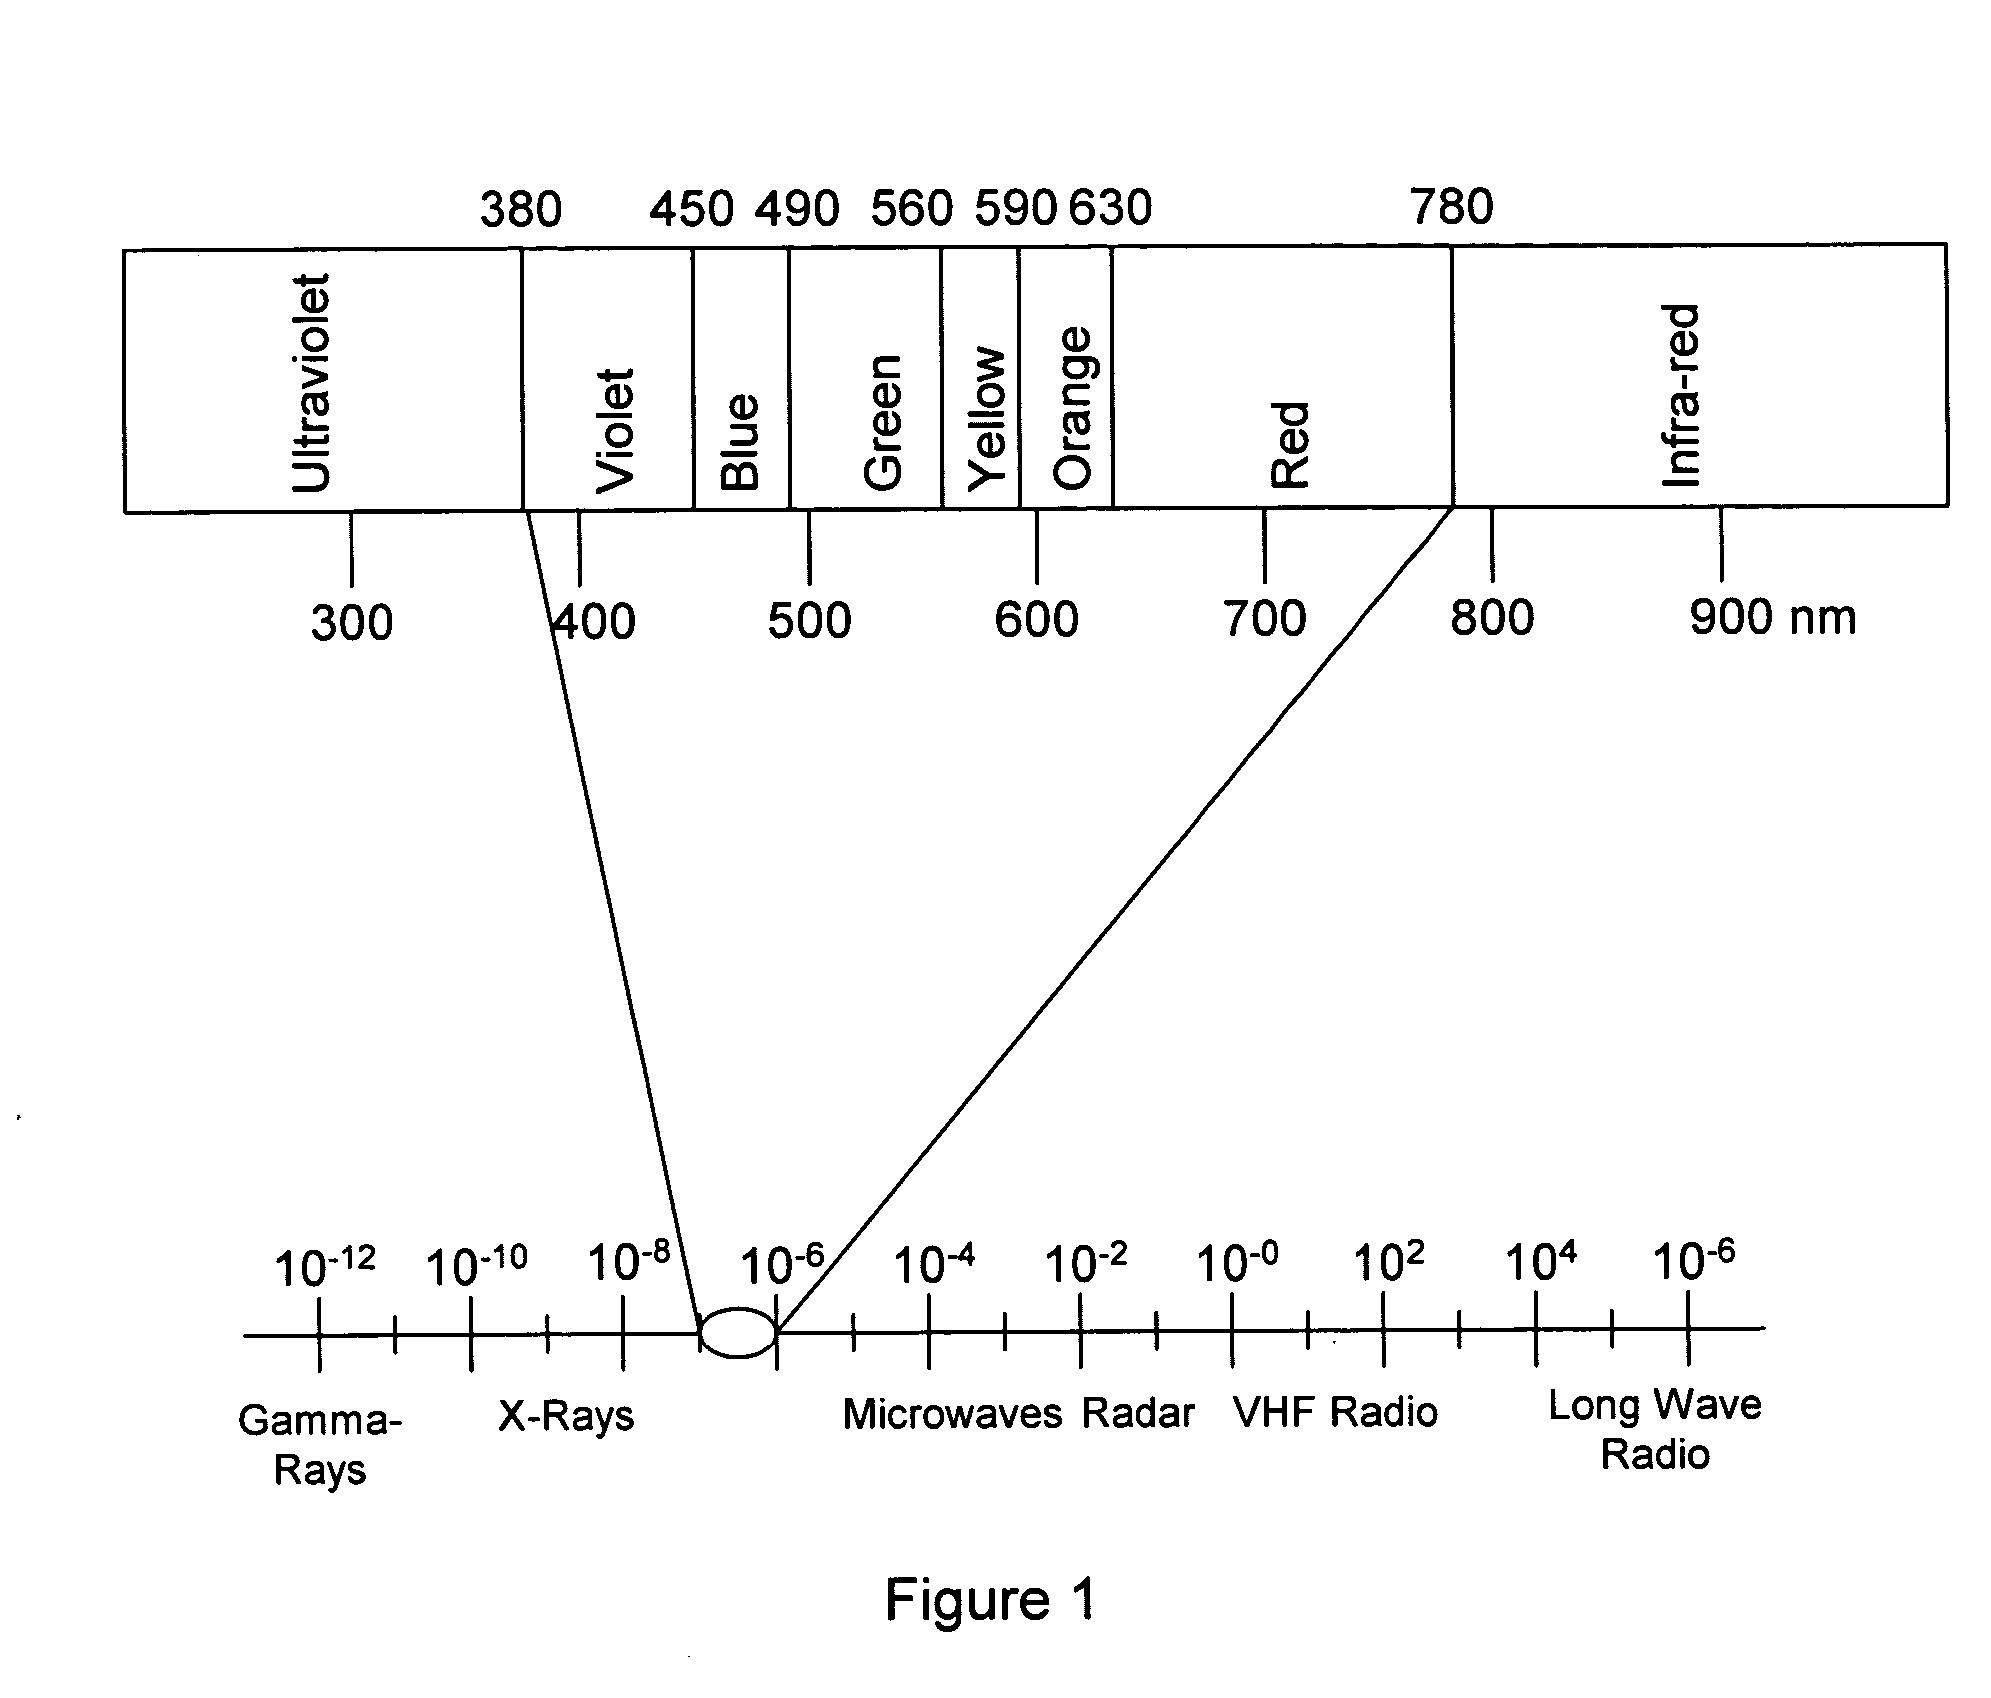 Systems, methods, and computer program products for converting between color gamuts associated with different image processing devices